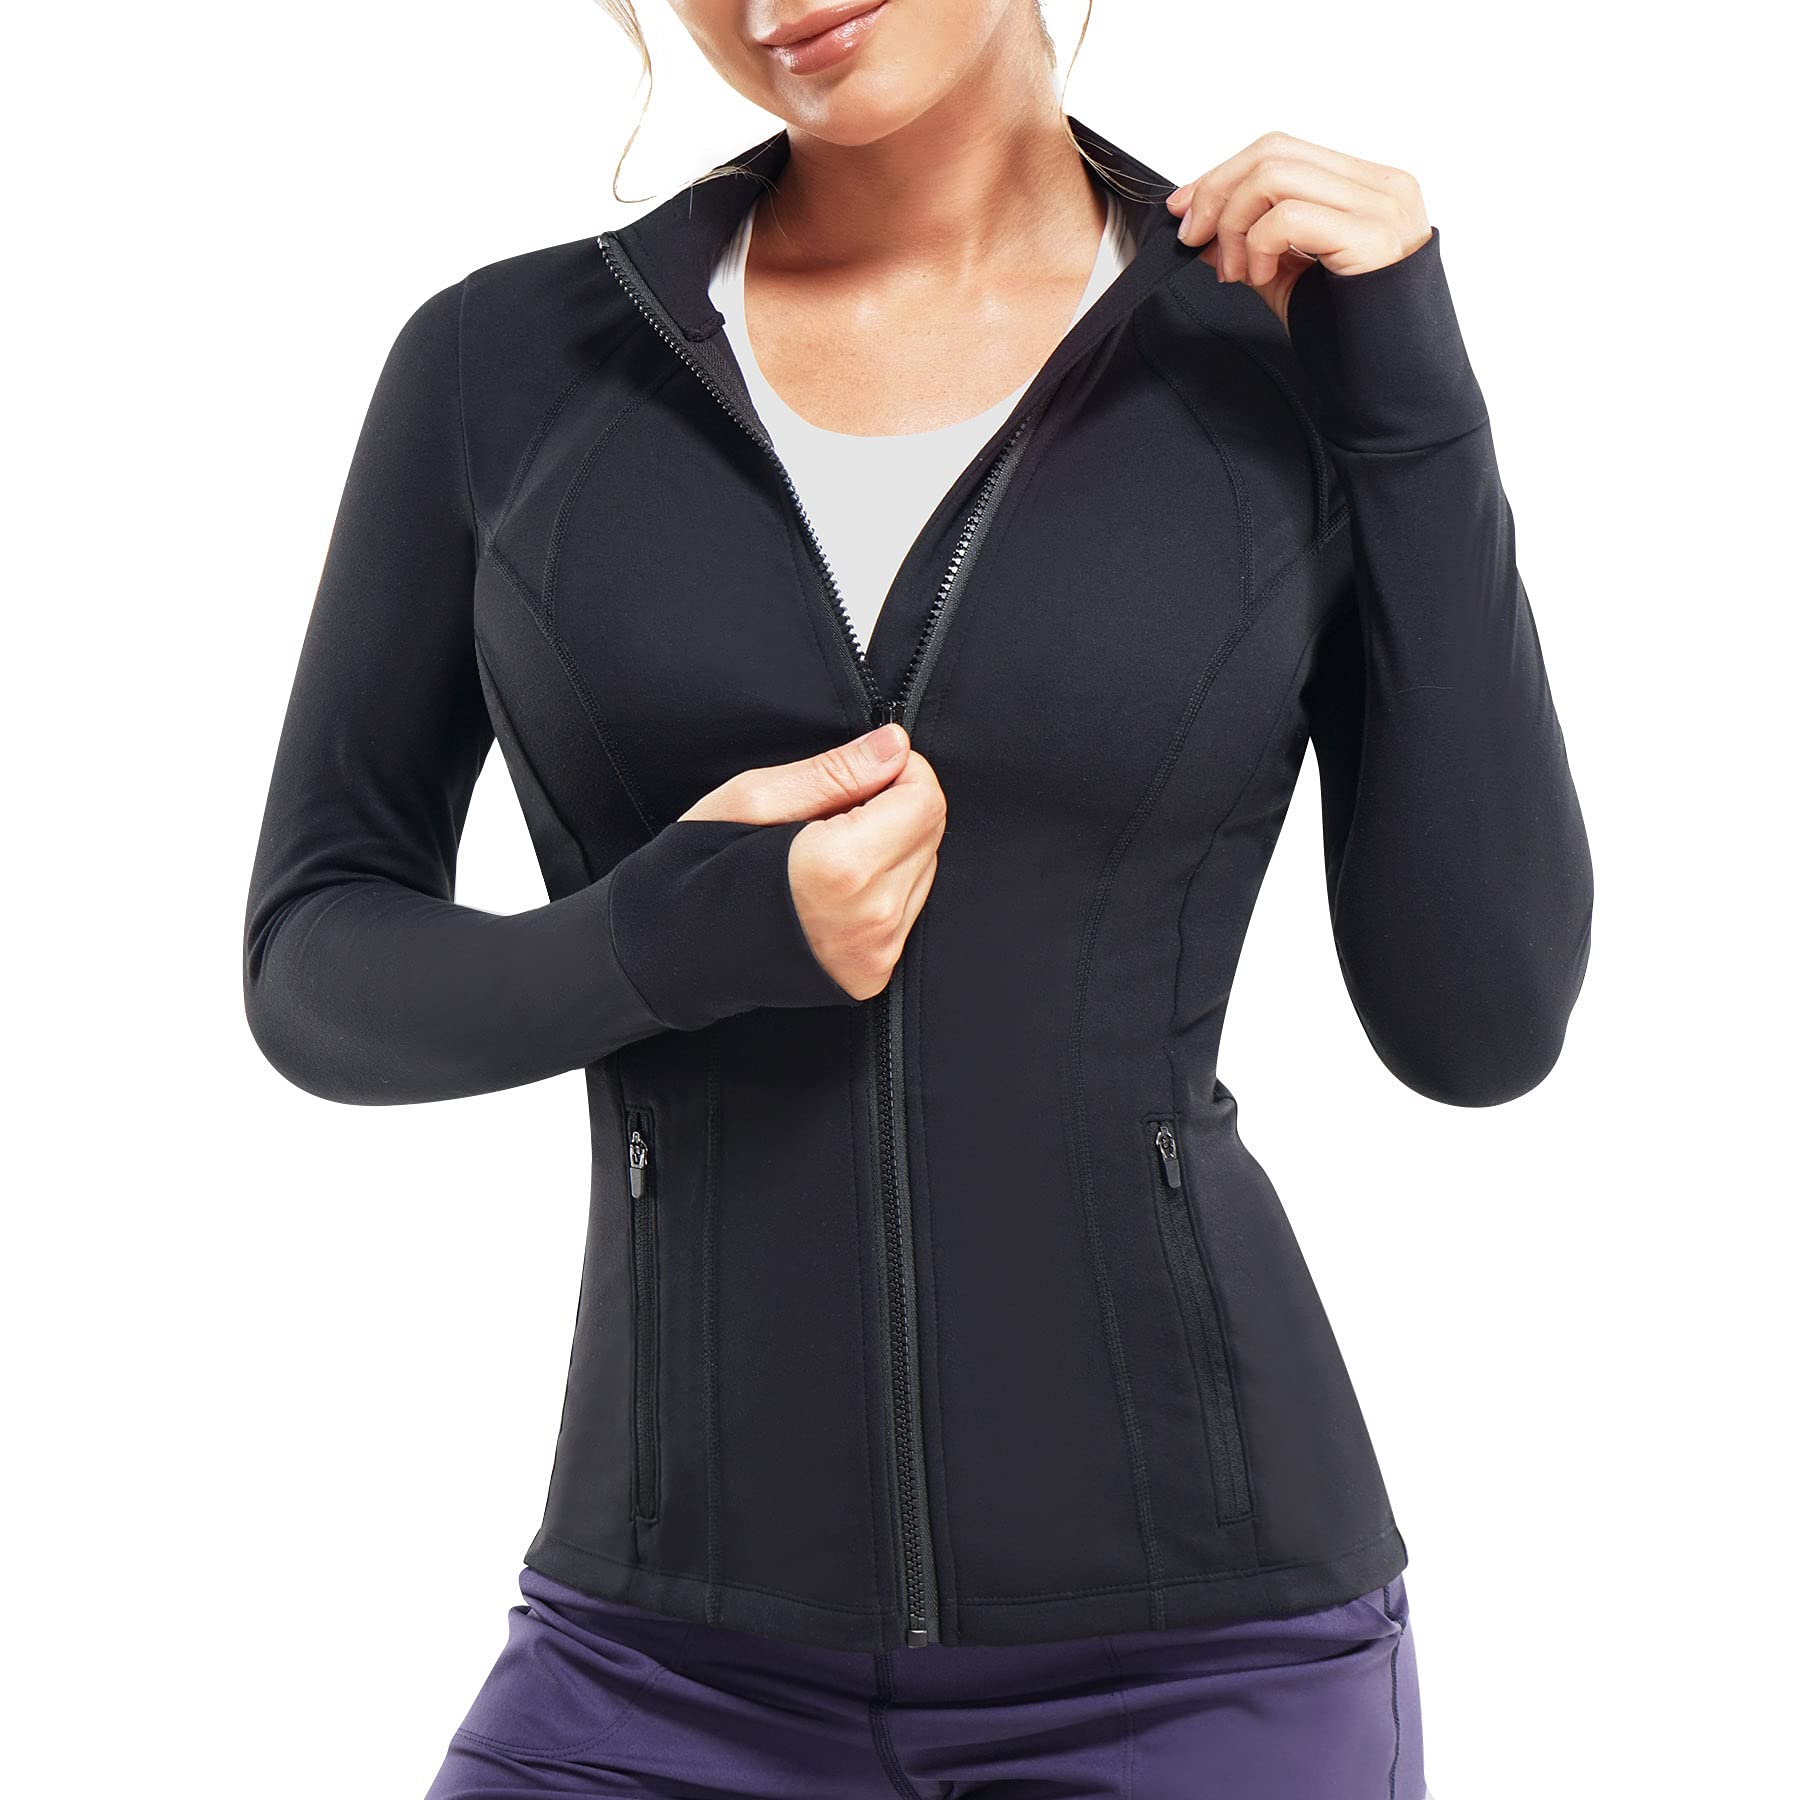 Women Full Zip-up Yoga Top Workout Running Jackets with Thumb Holes  Stretchy Fitted Long Sleeve